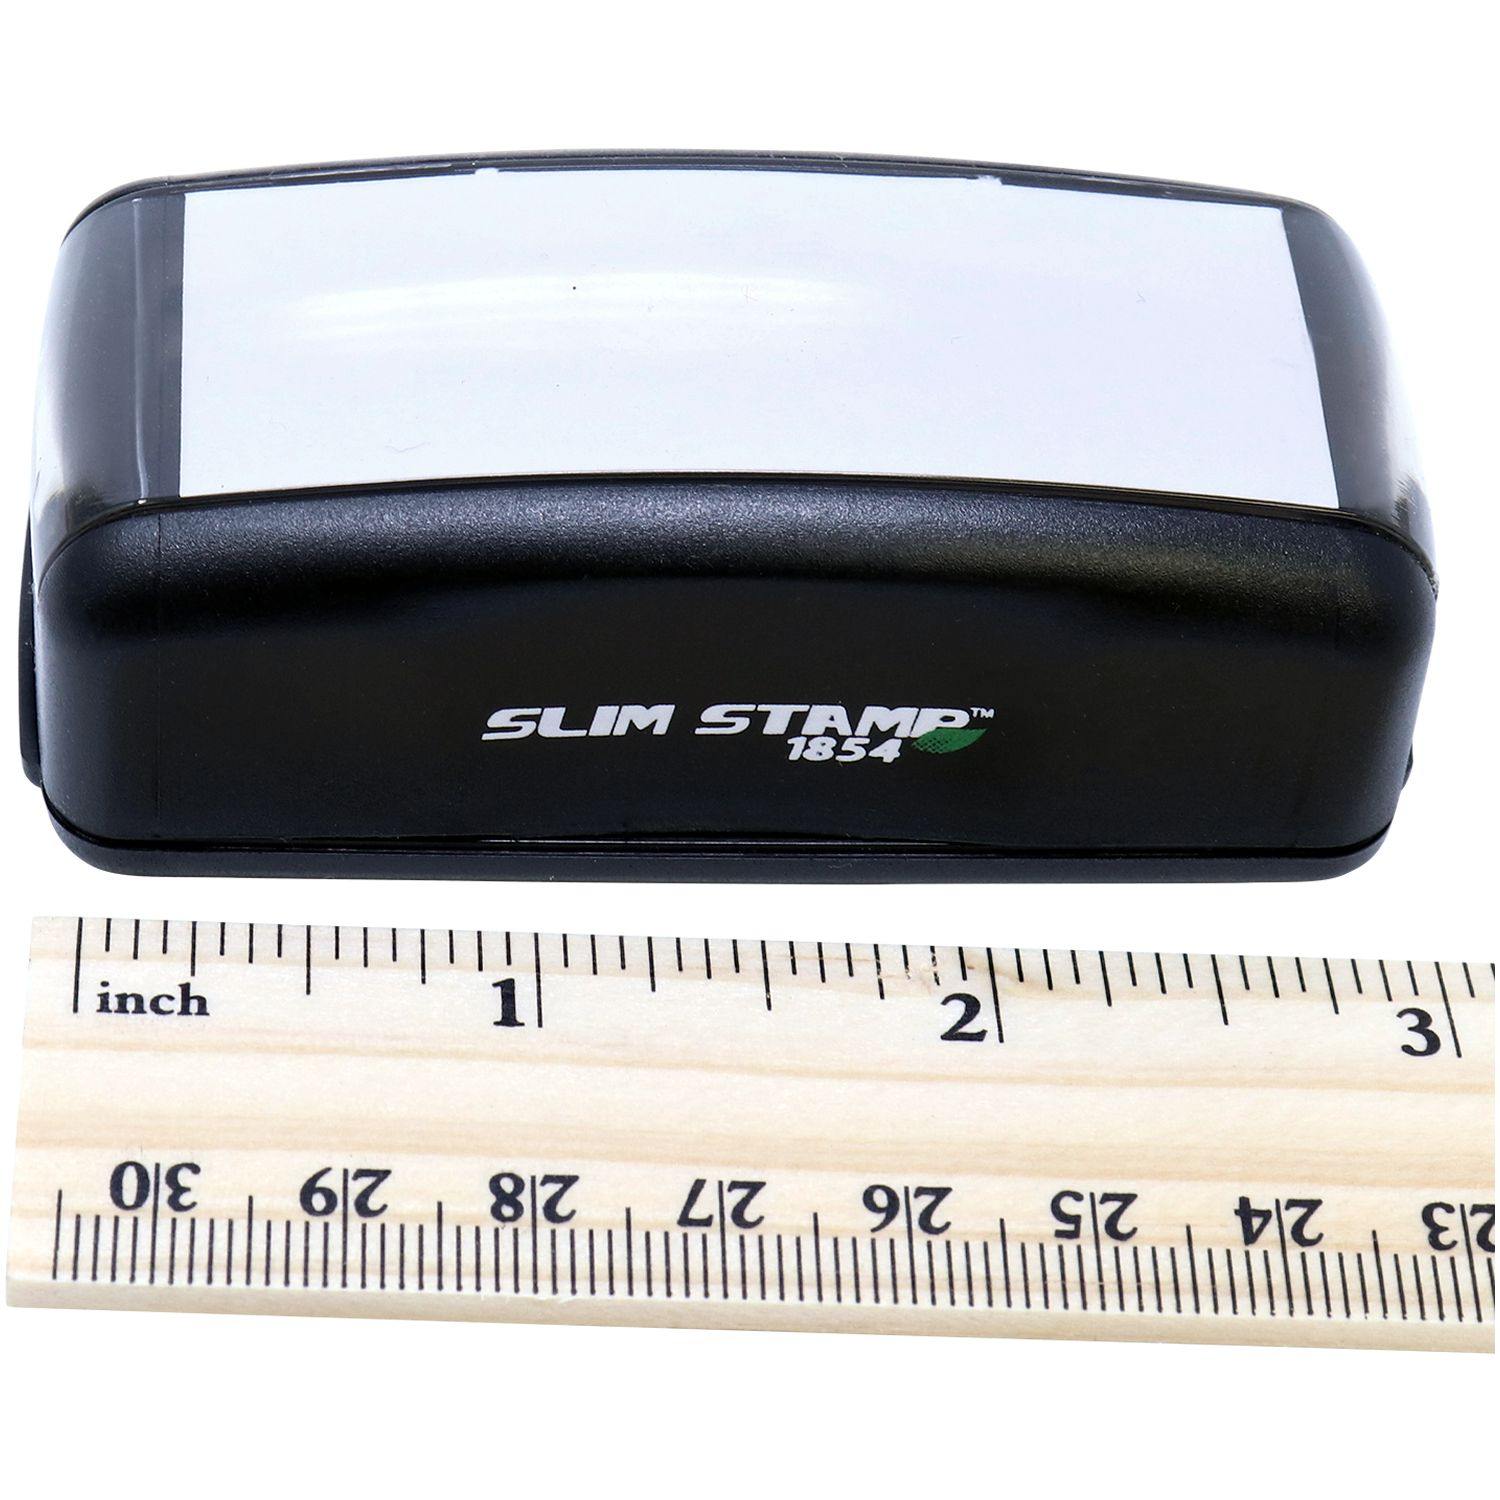 Measurement Large Pre Inked Account Closed Stamp with Ruler